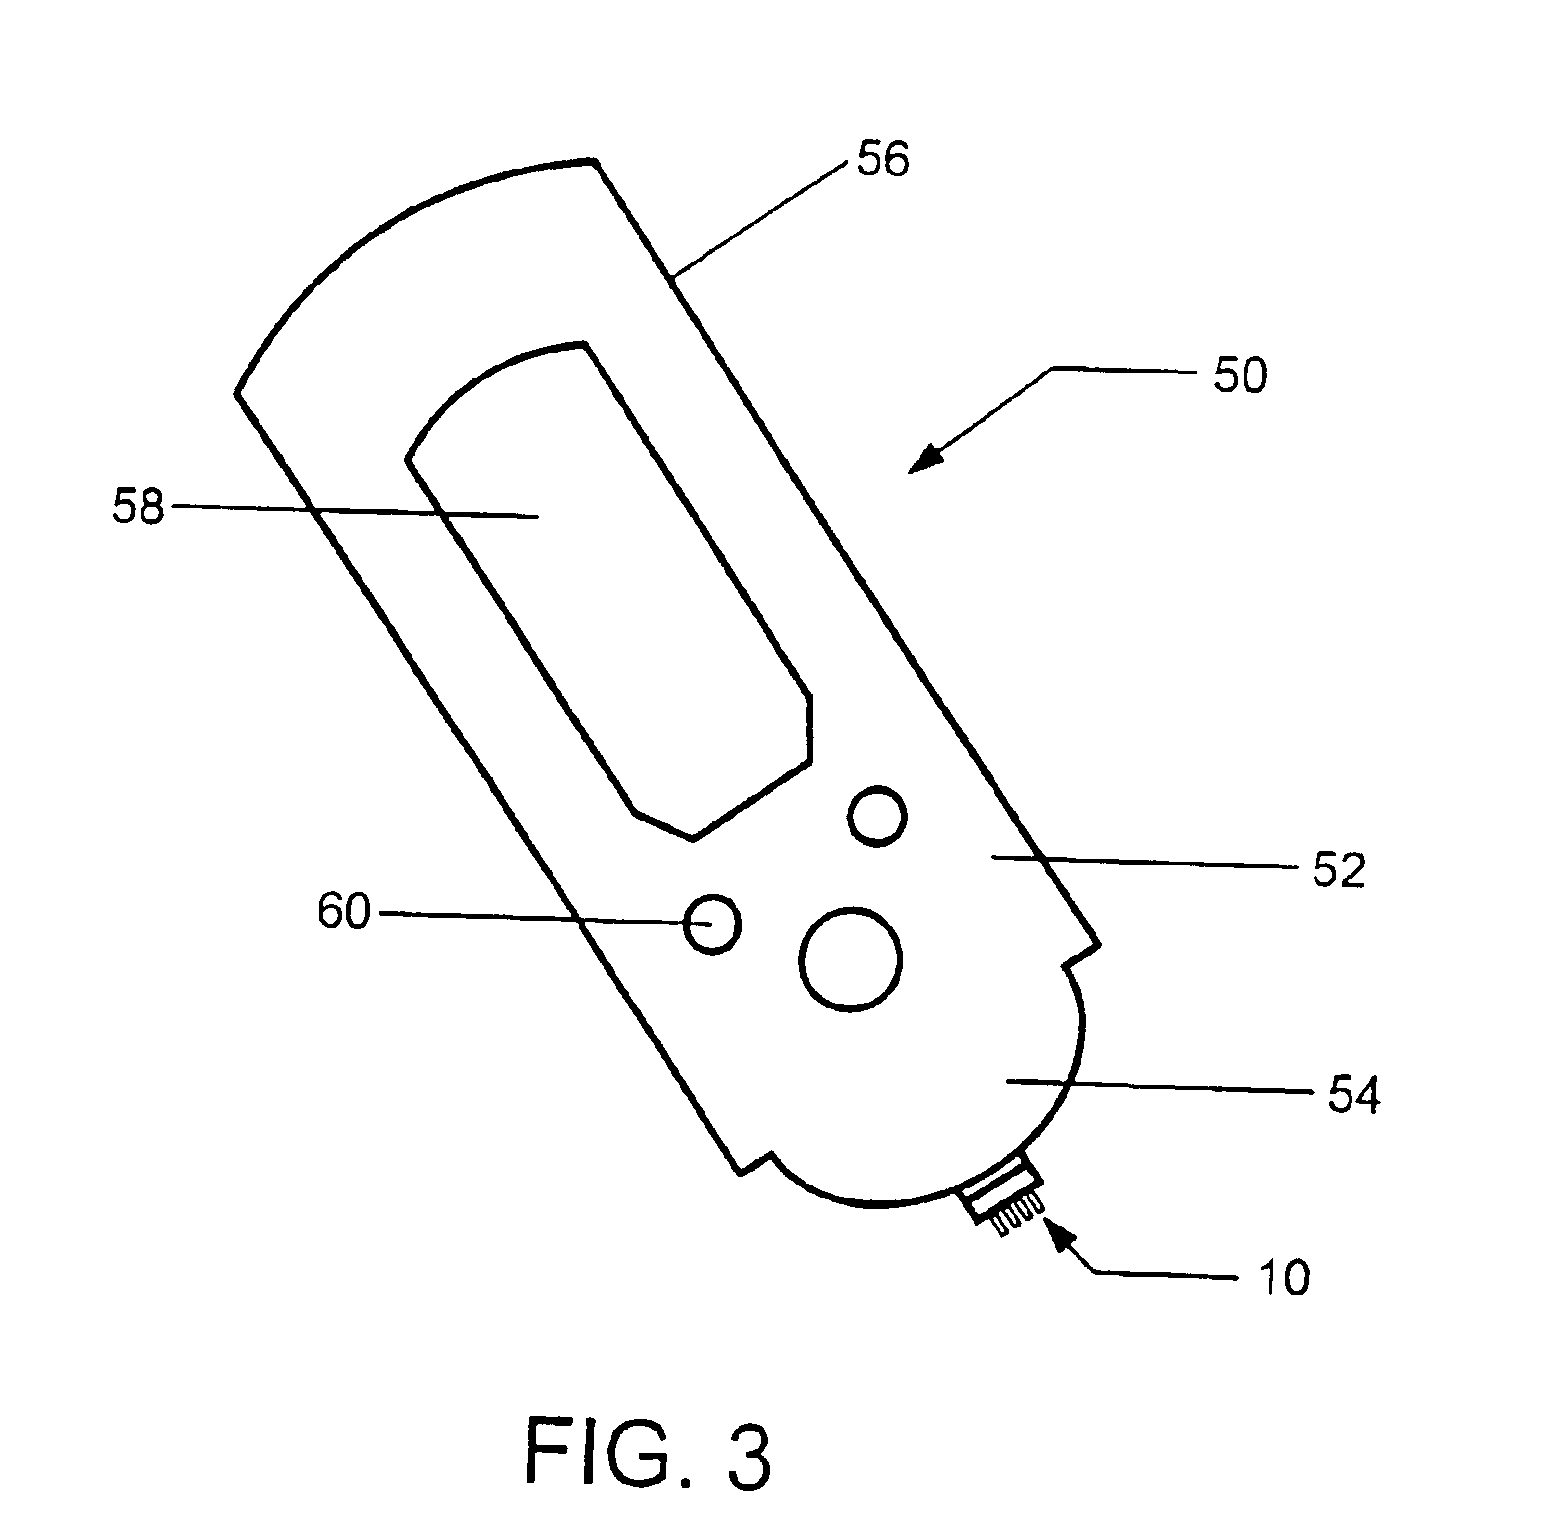 Percutaneous biological fluid sampling and analyte measurement devices and methods